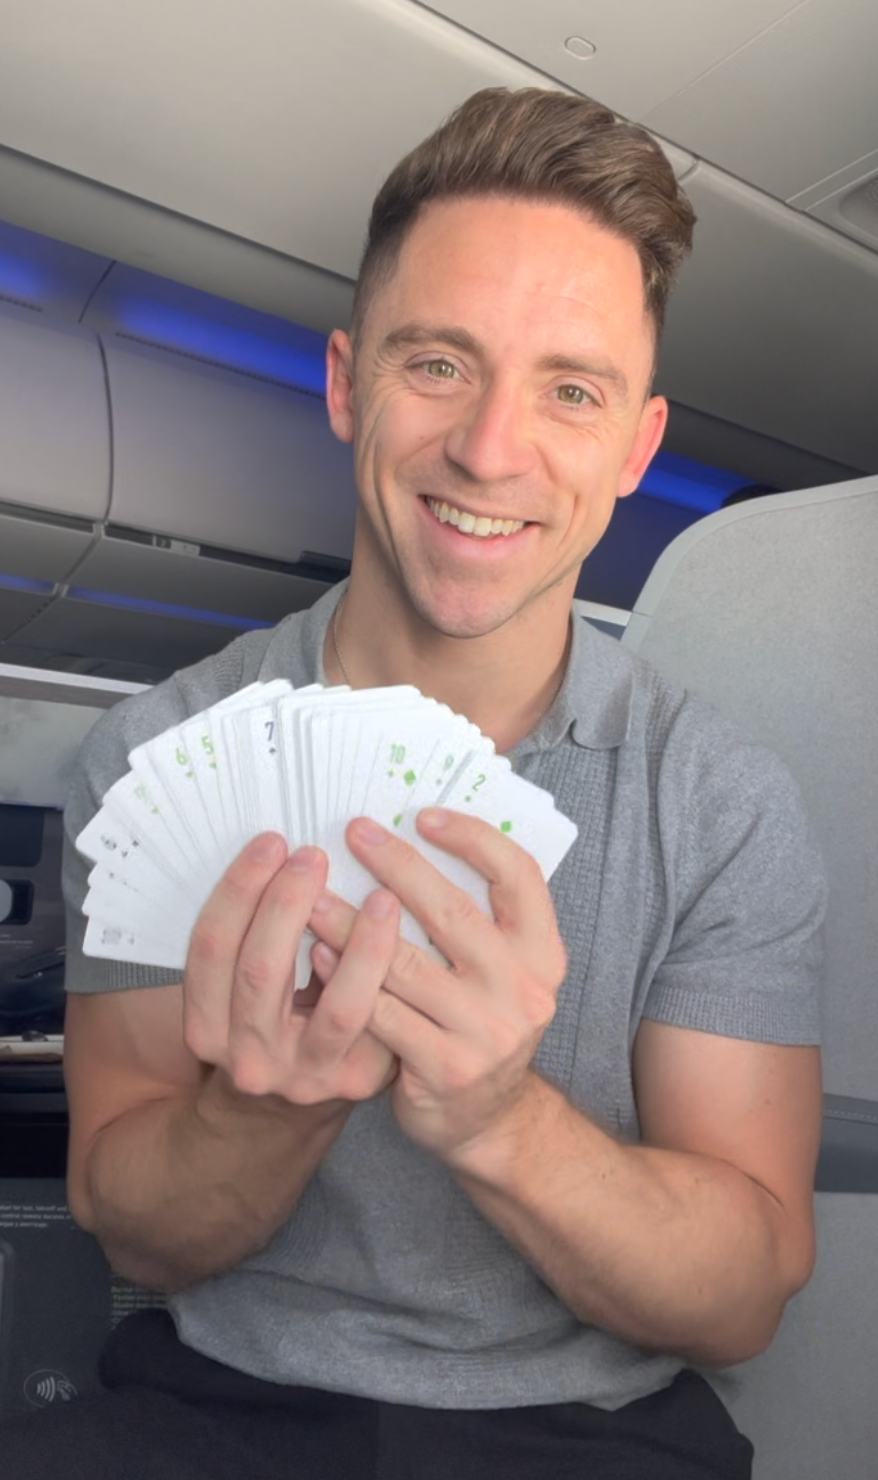 JetBlue Mint playing cards